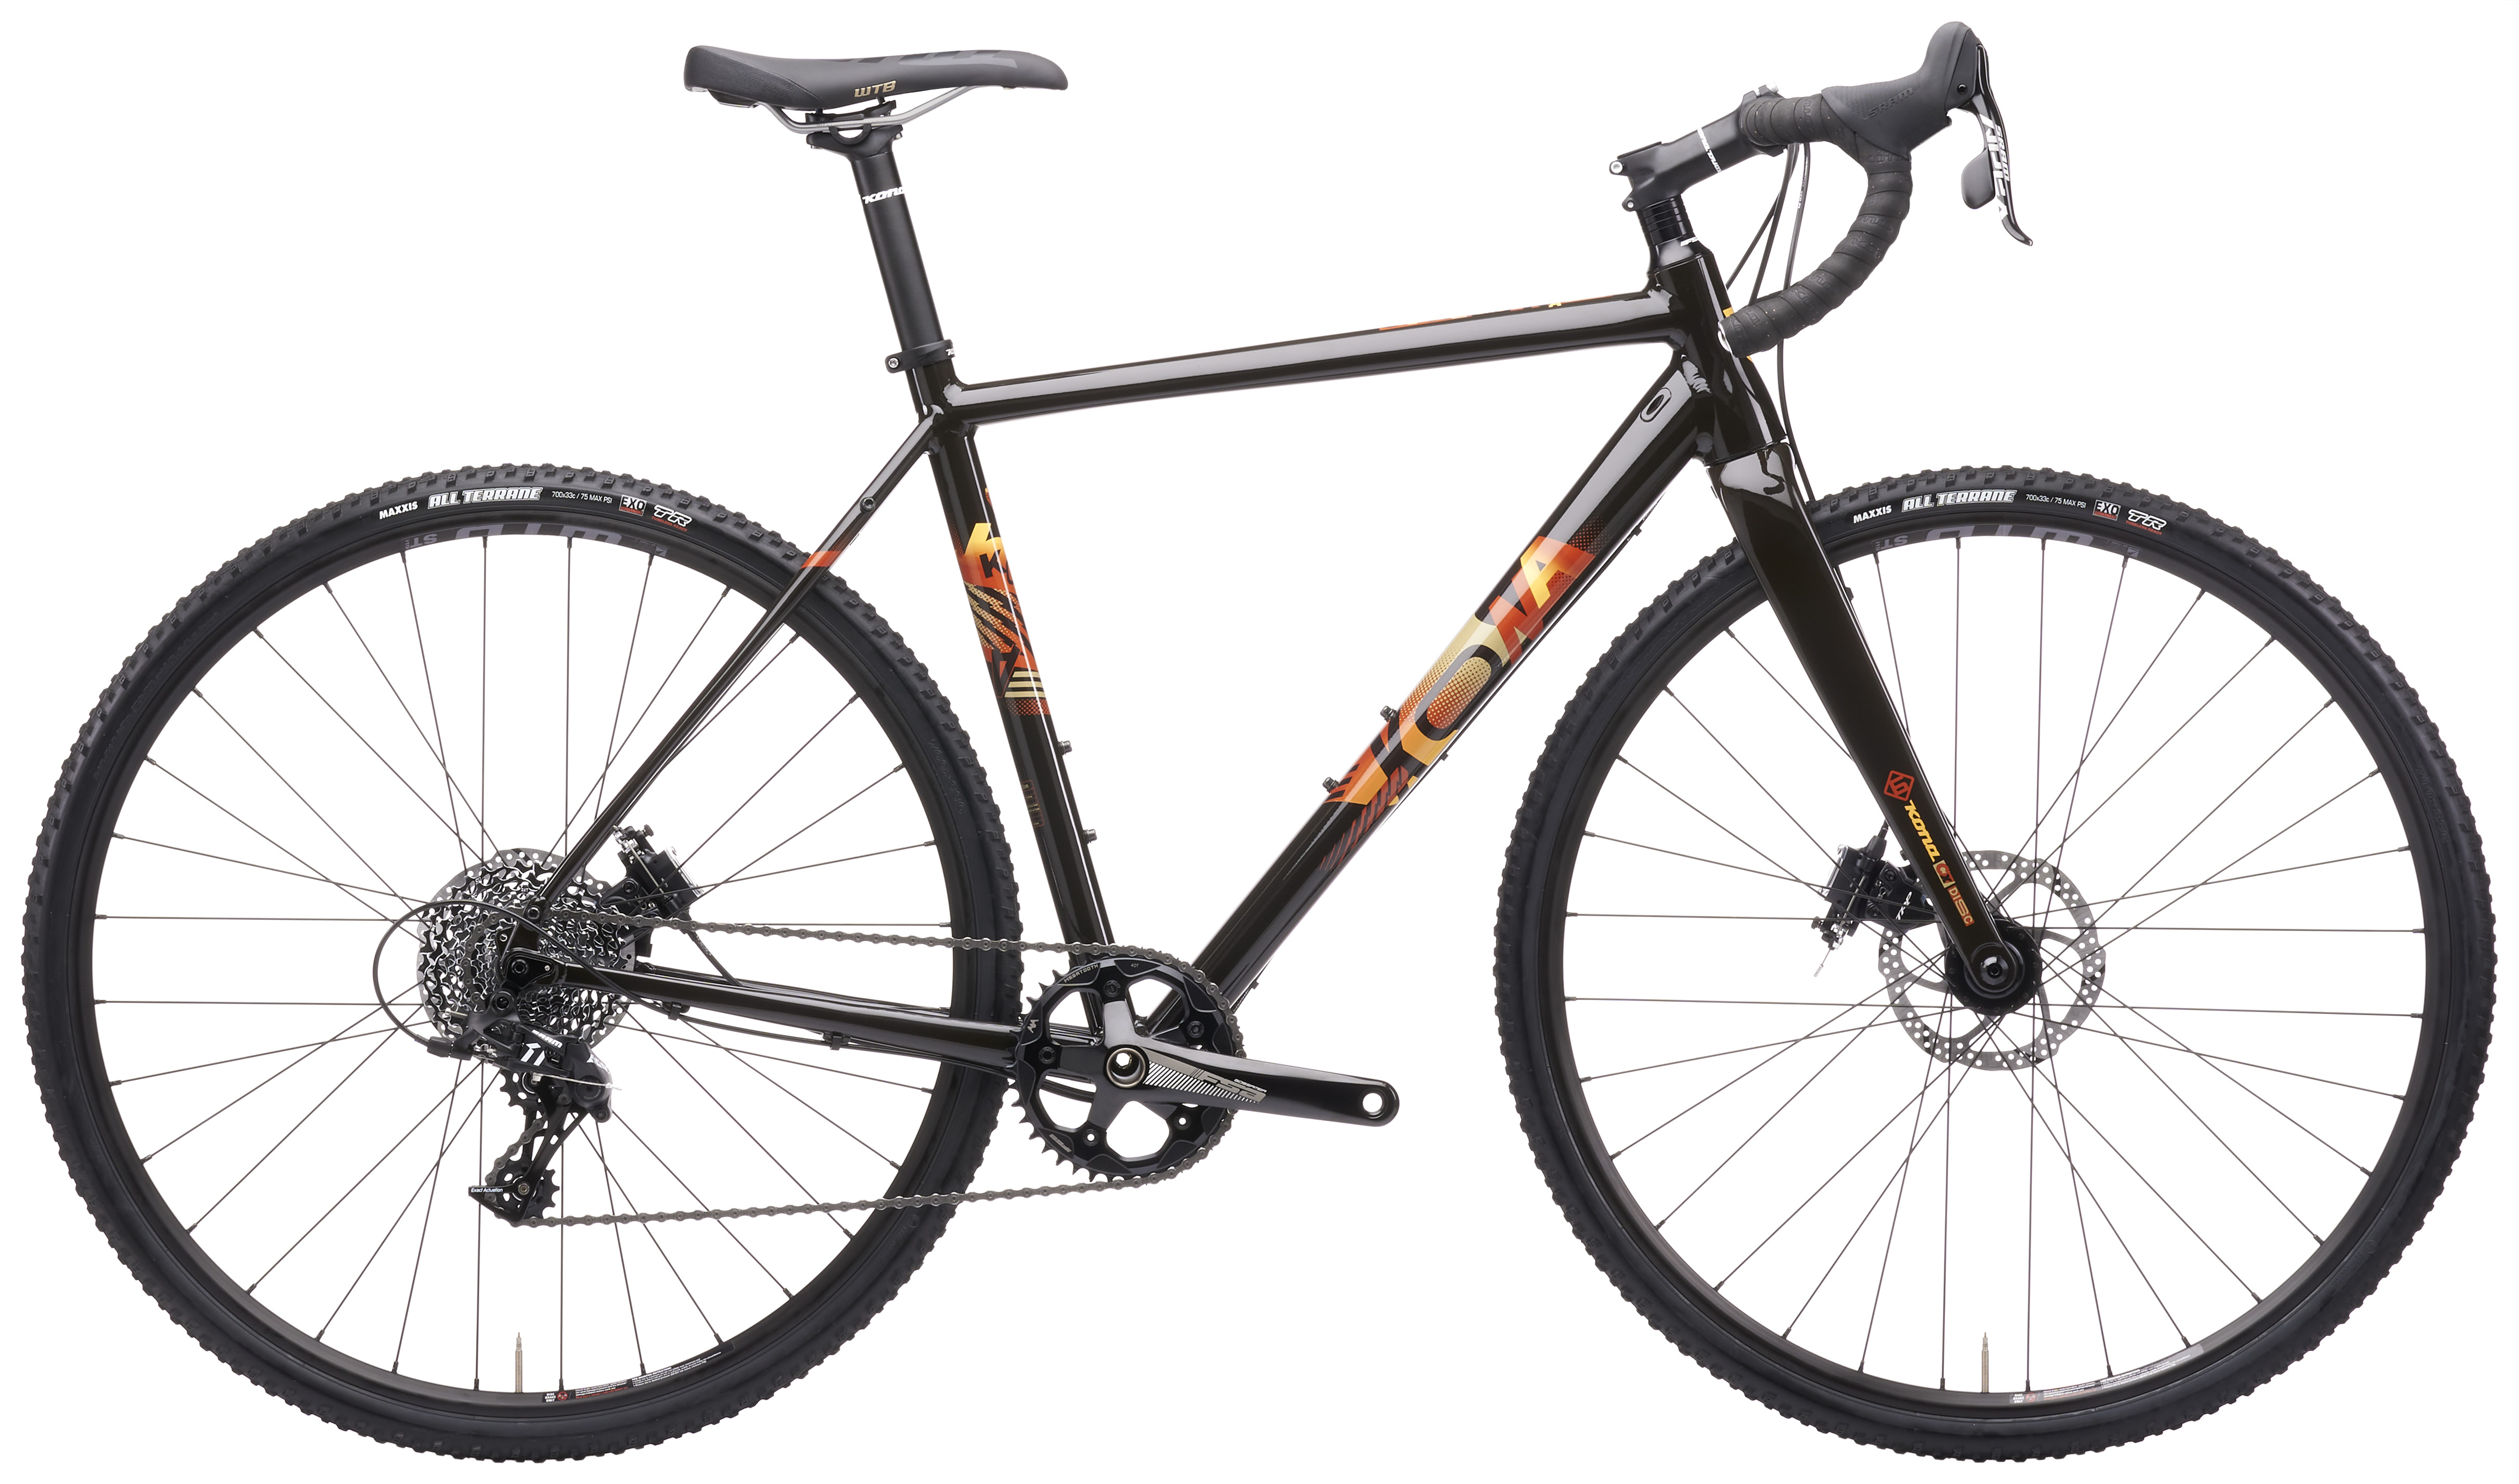 rei electra townie 7d